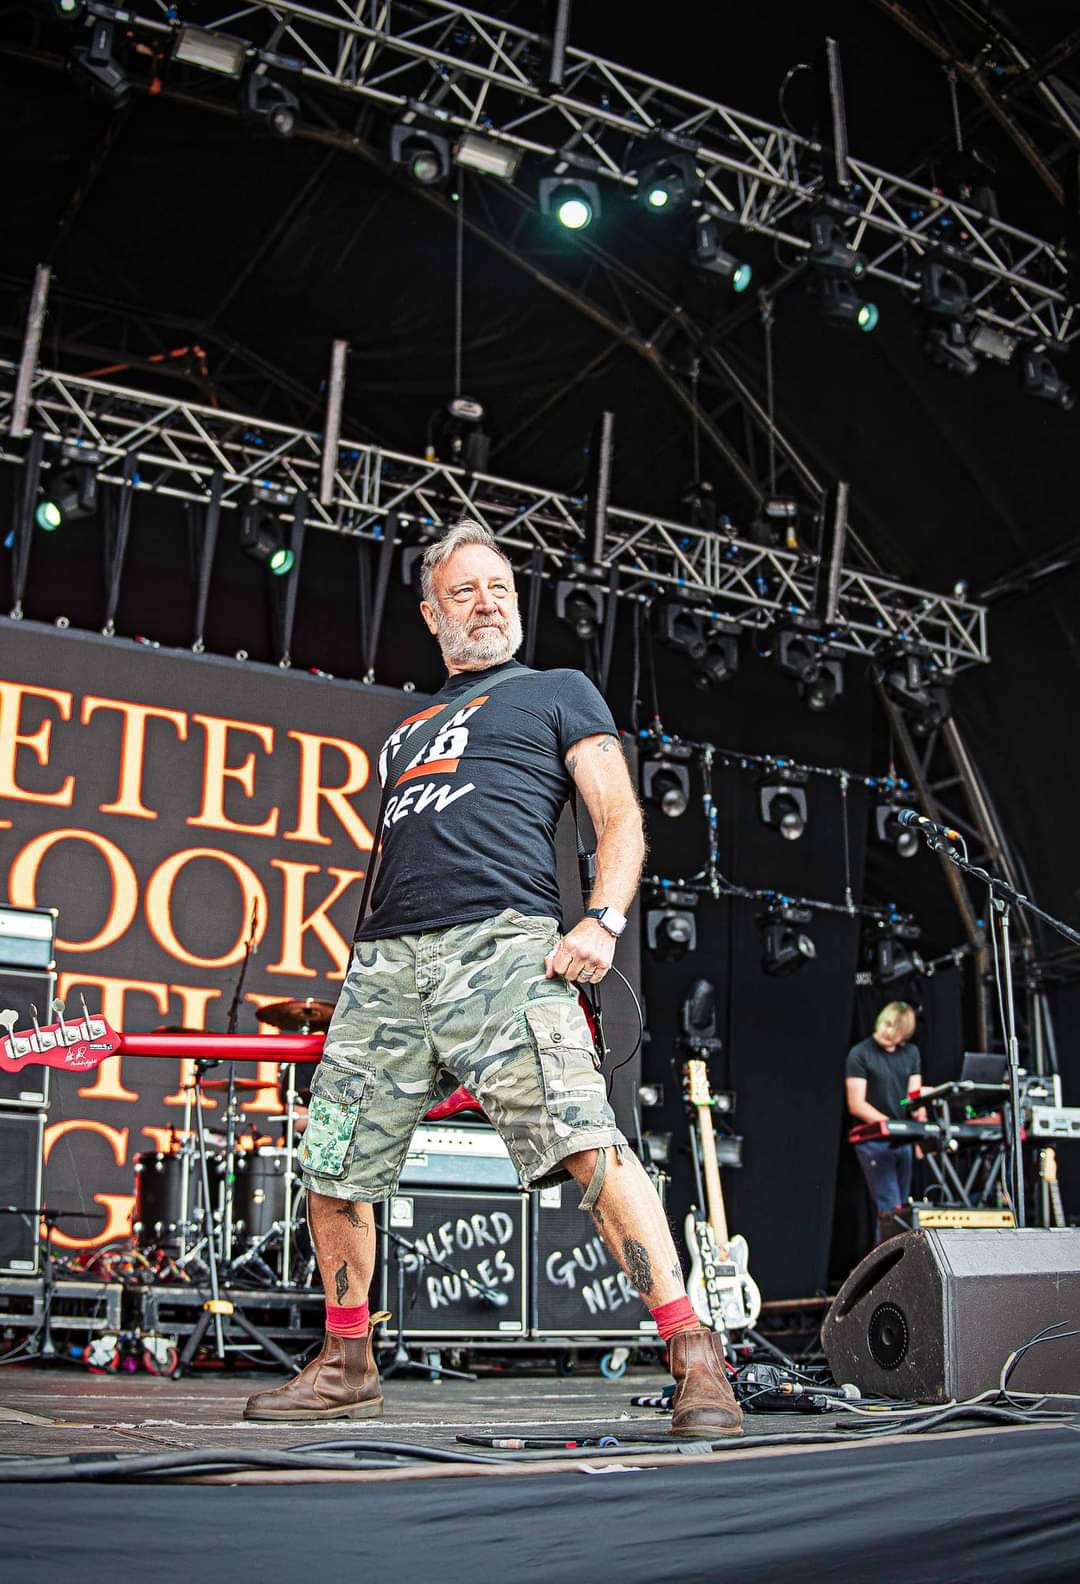  Happy Birthday to the legend known as Peter Hook.  